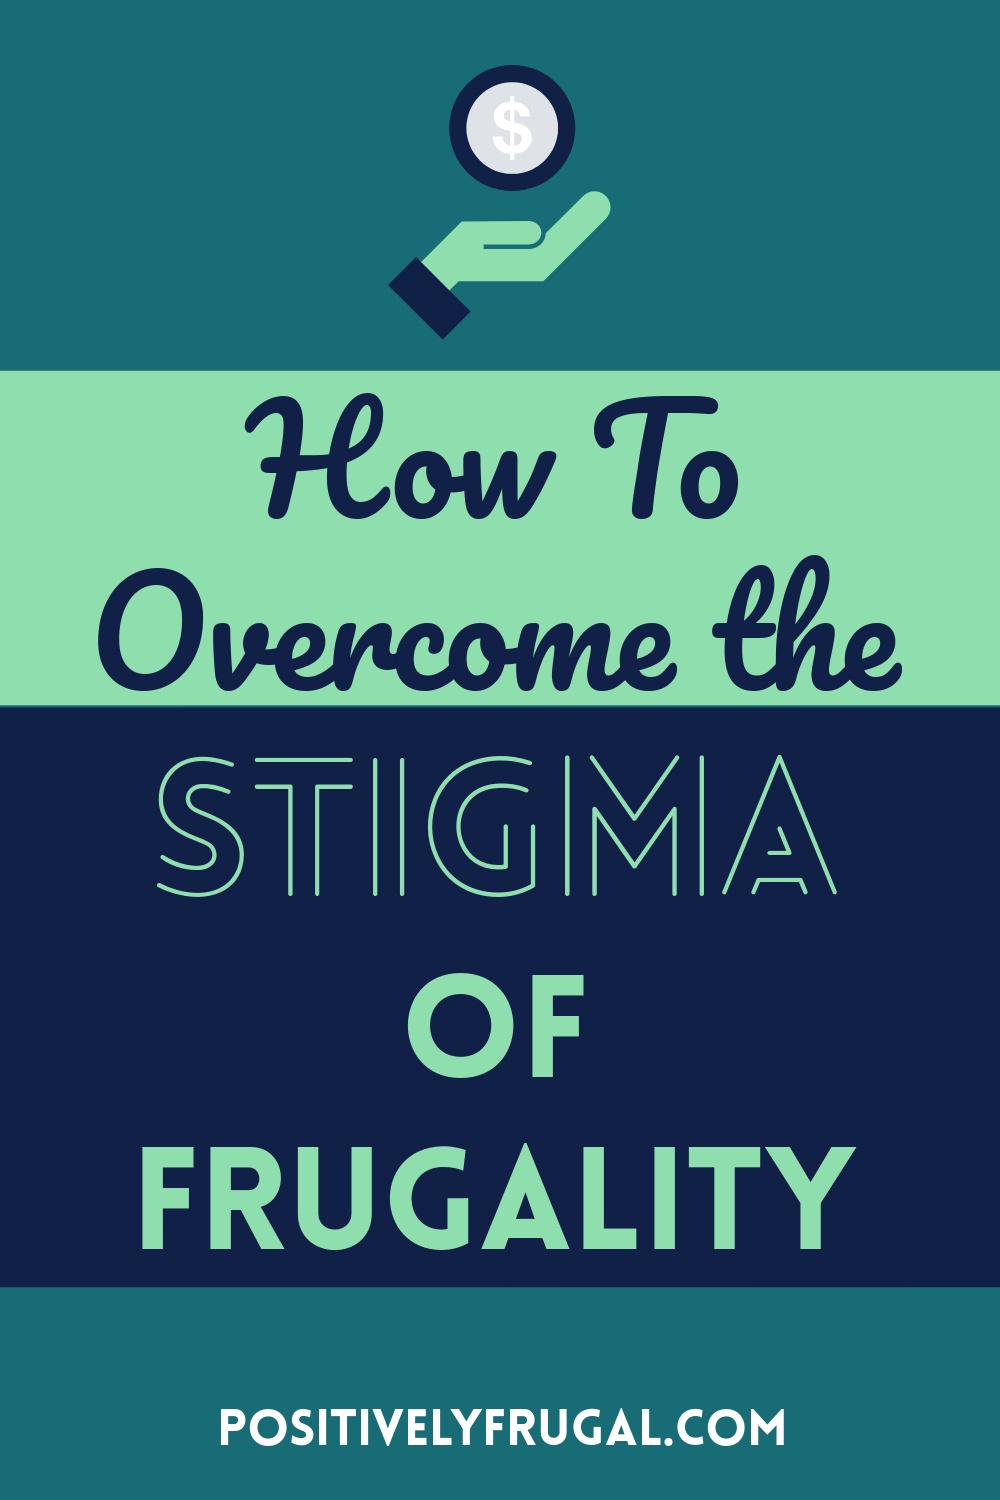 How To Overcome the Stigma of Frugality by PositivelyFrugal.com